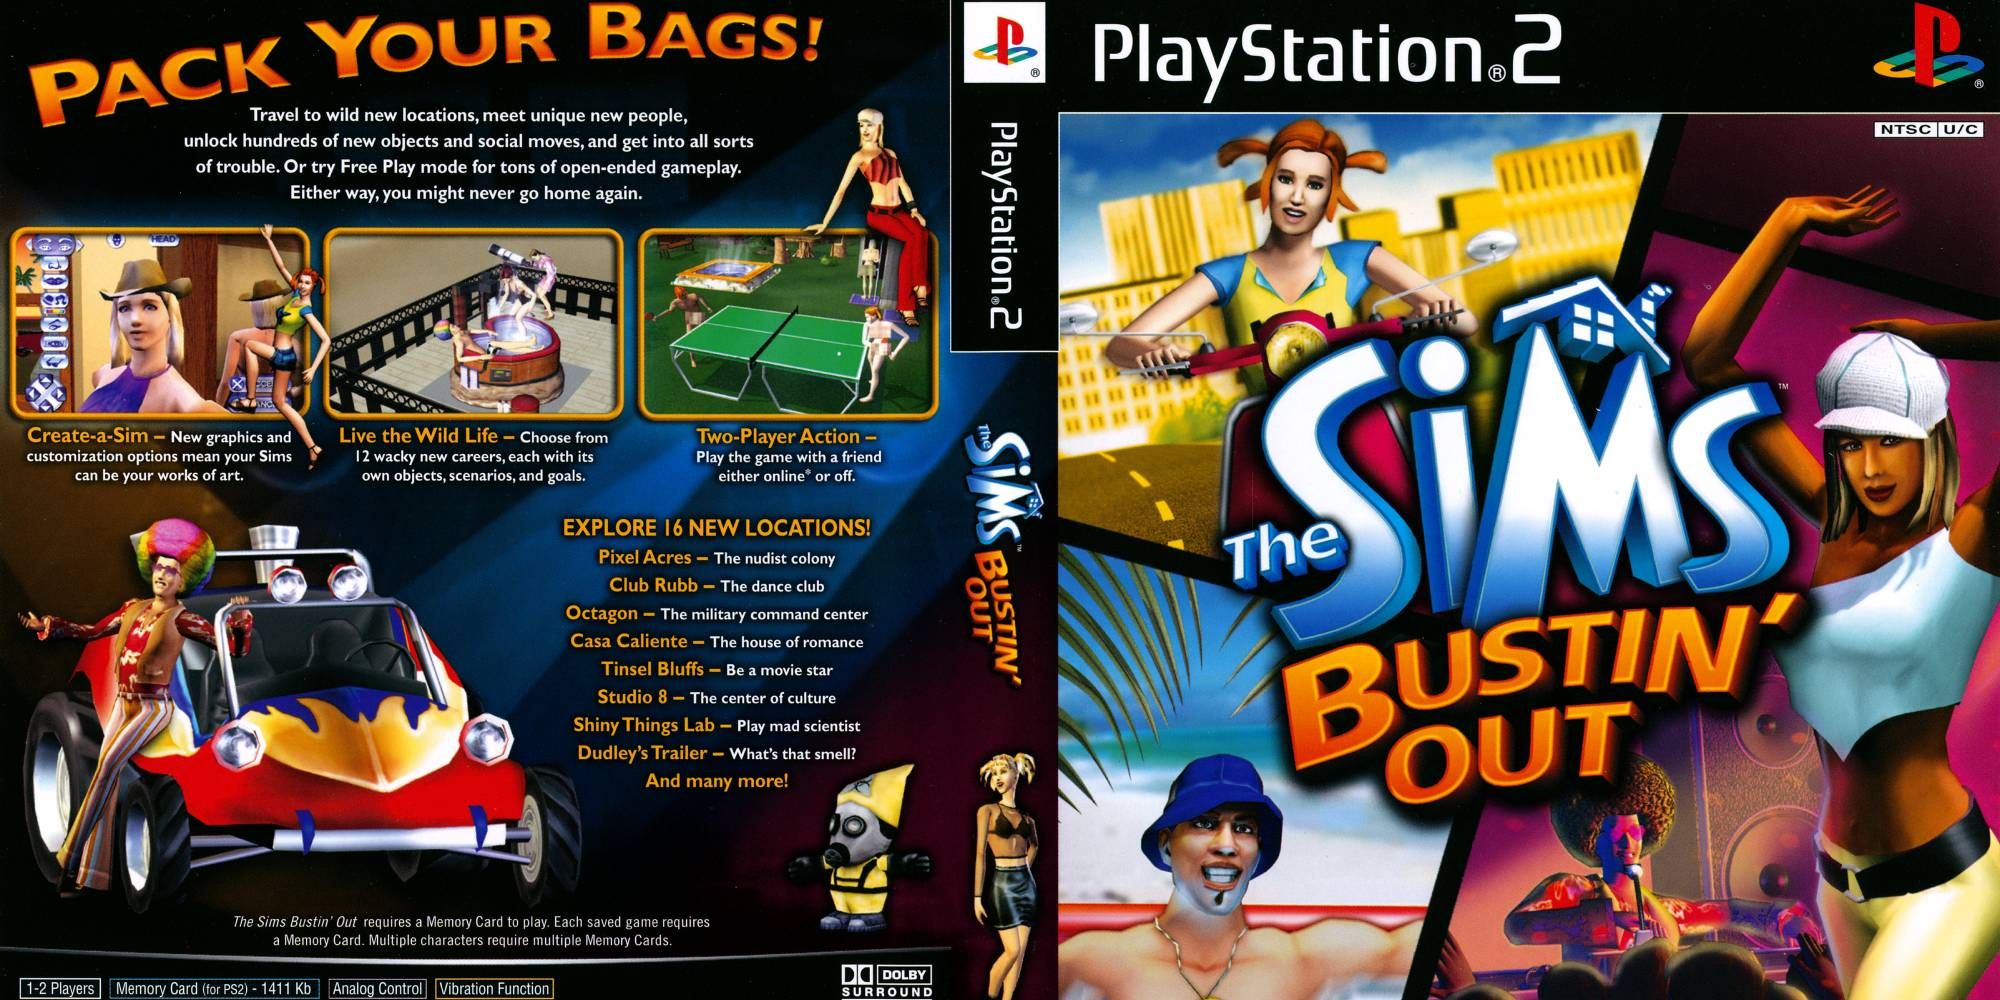 Box art from The Sims Bustin Out PS2 edition